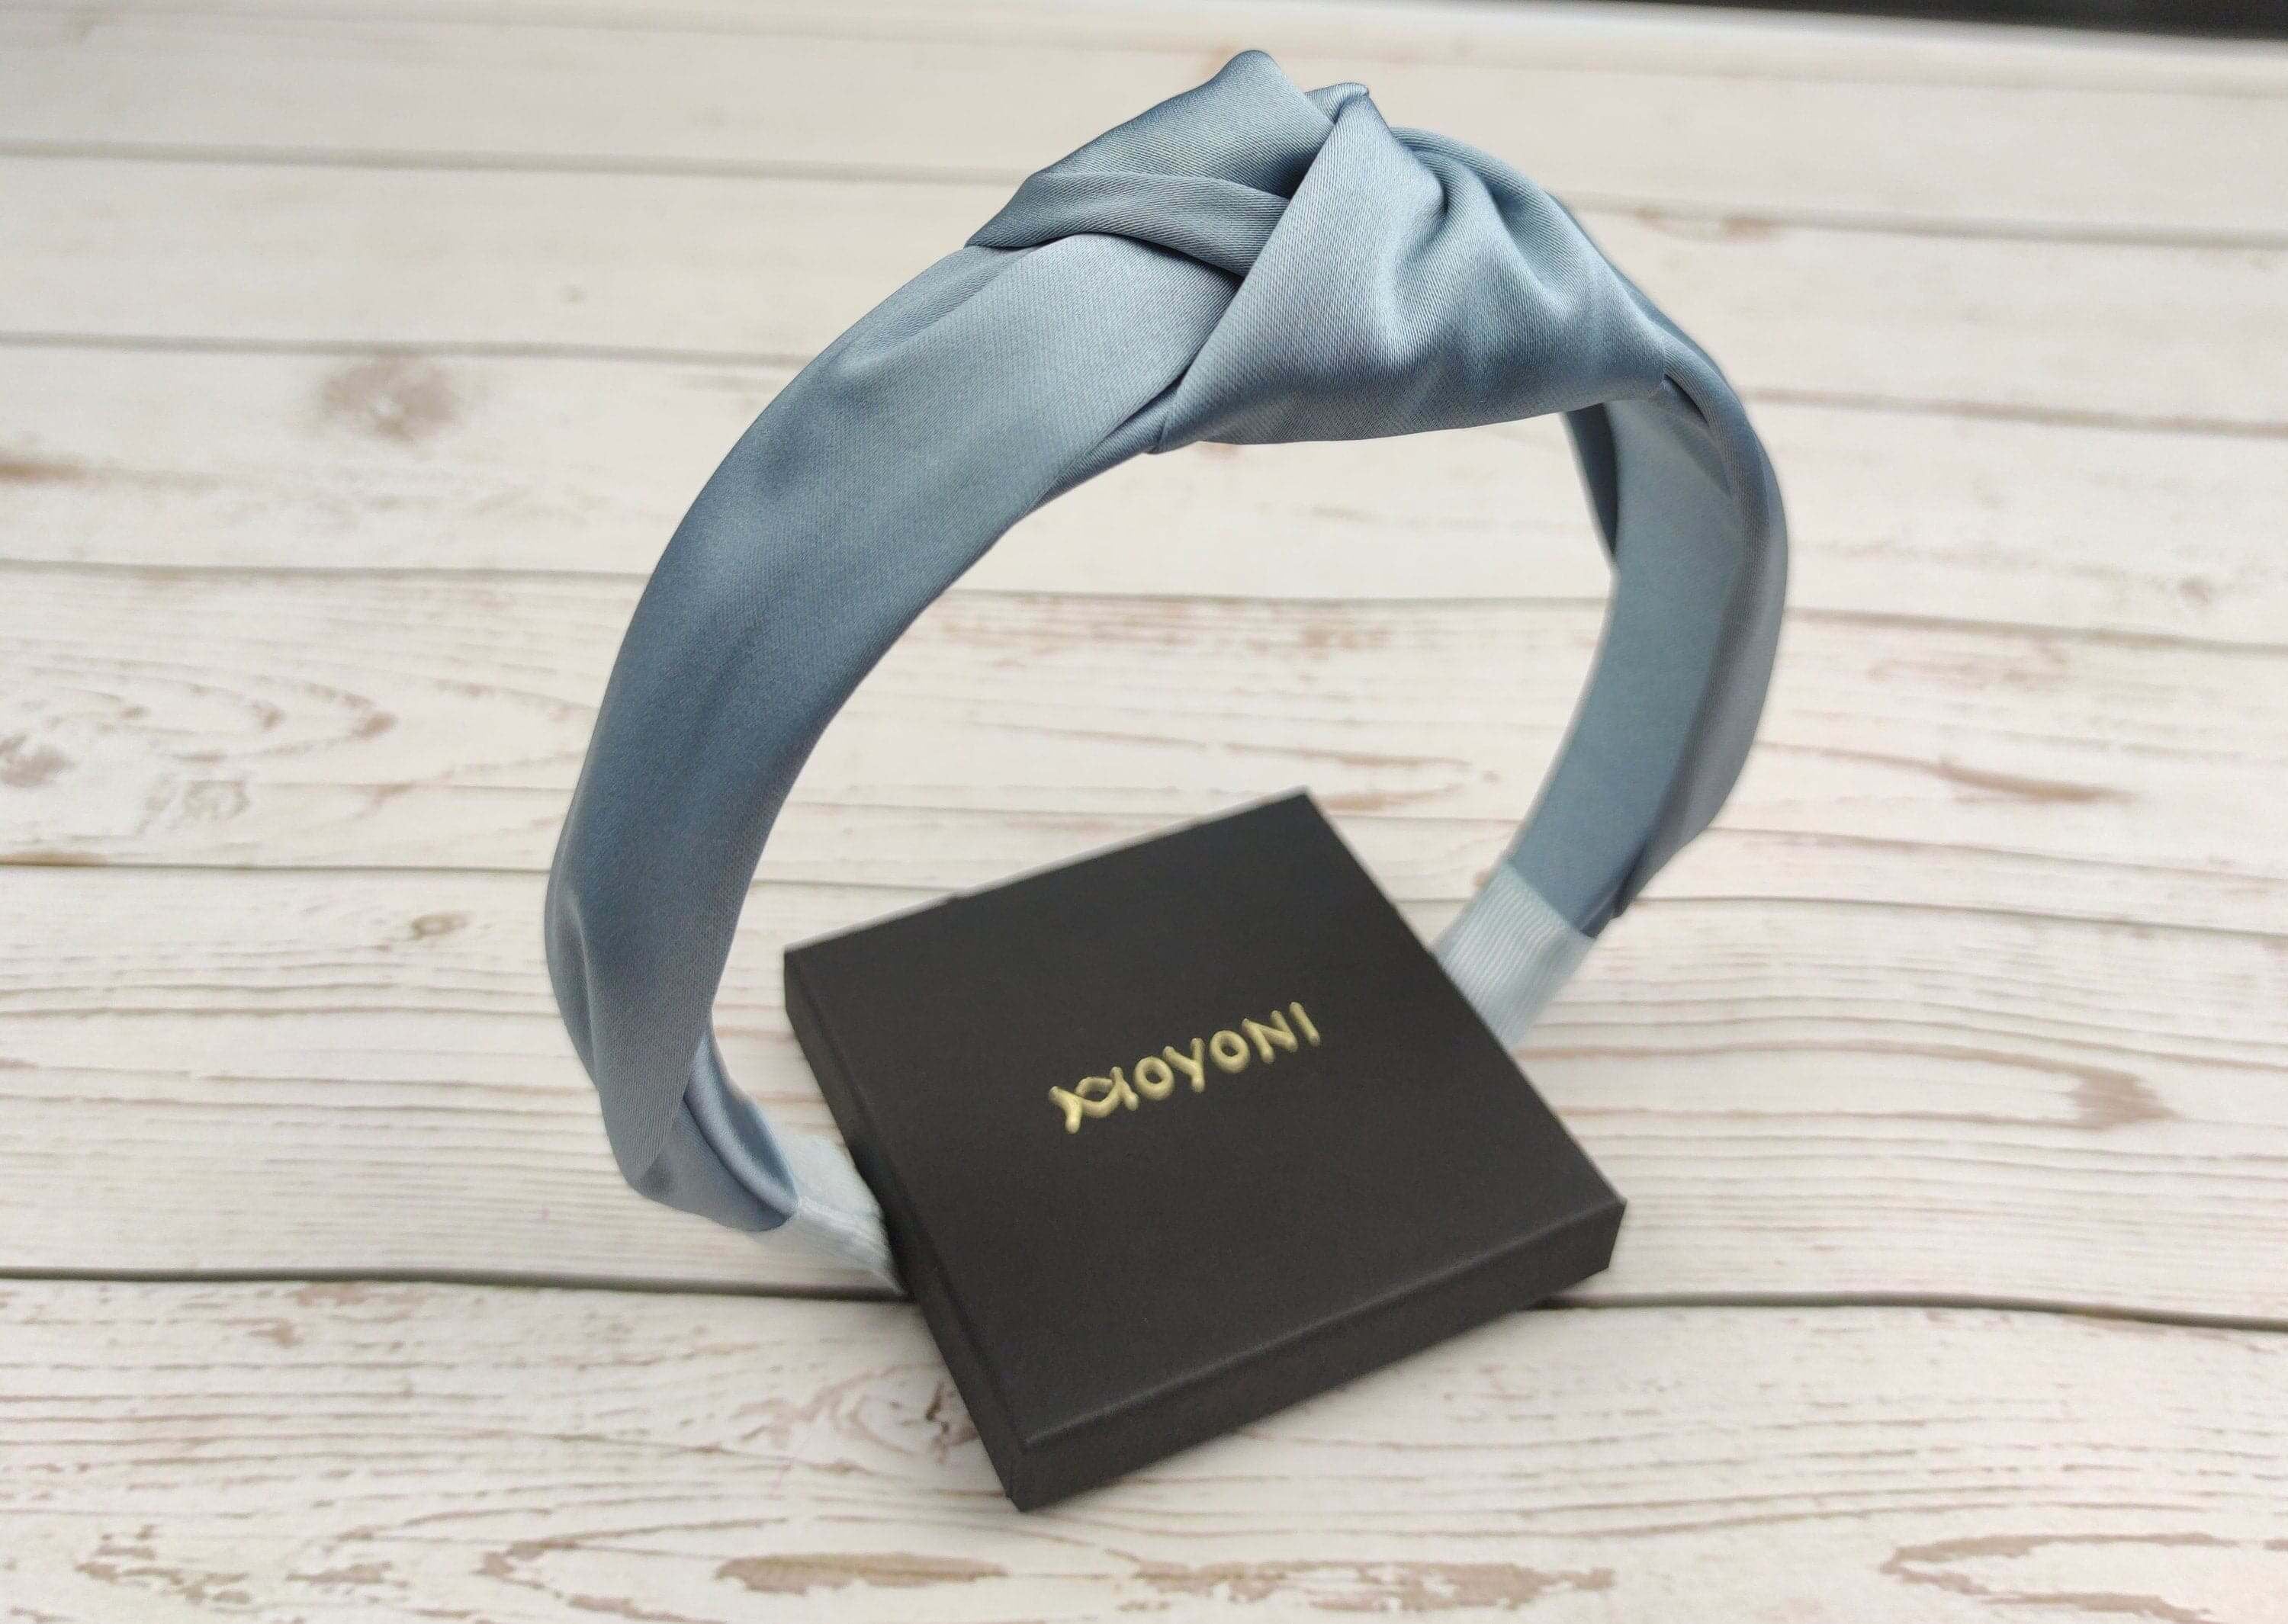 Make a fashion statement with this light blue headband, designed with a knot twist and made from soft and luxurious satin material.